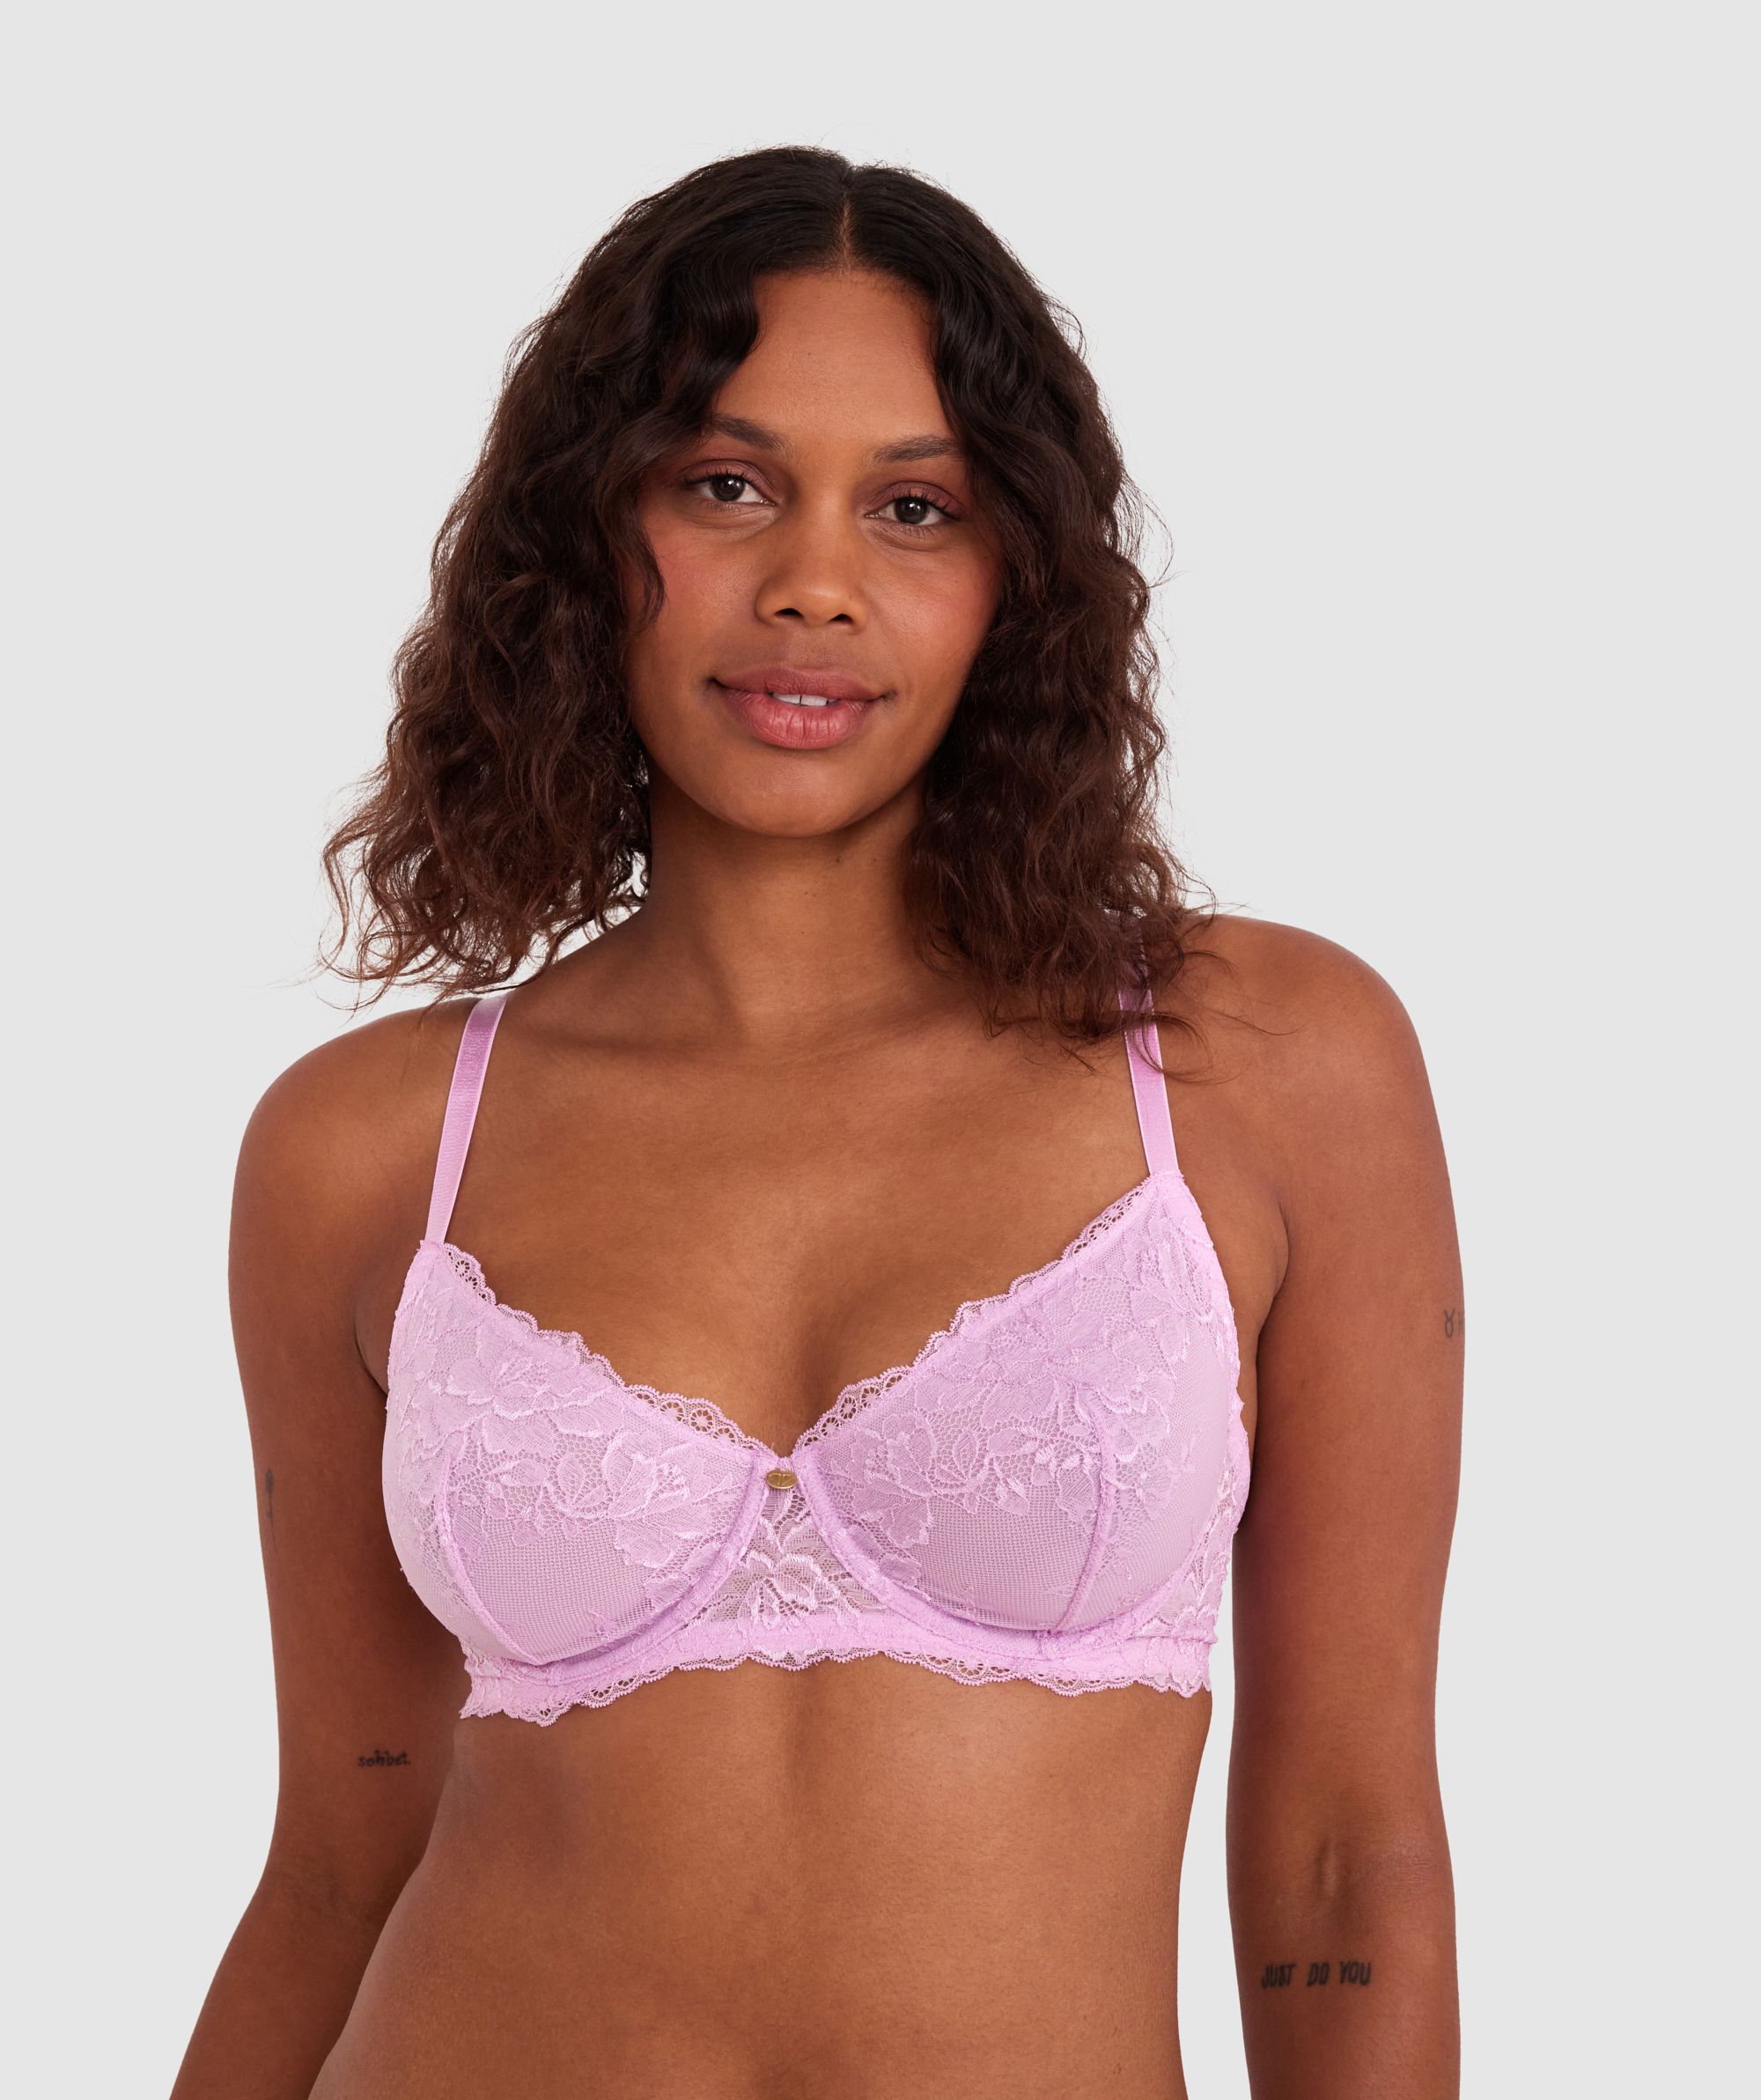 Bras N Things Luxe Lace Underwire Bra - Pink